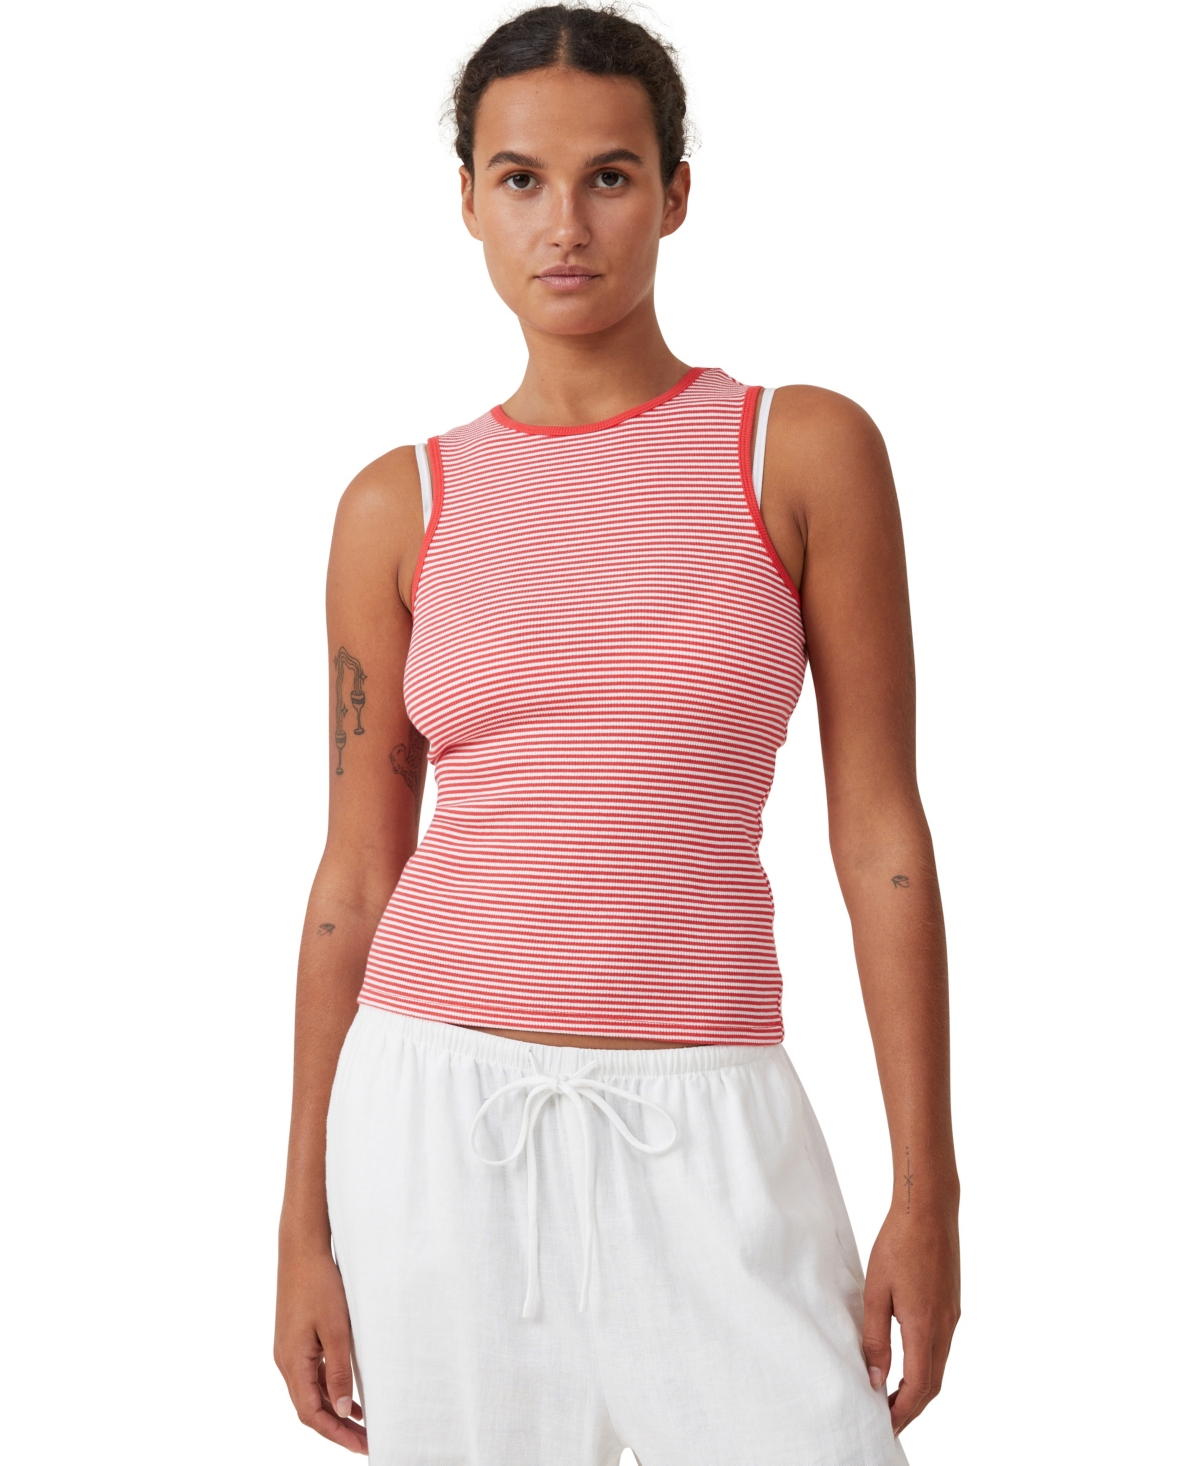 Women's The One Rib Racer Tank Top - White/Fiery Red